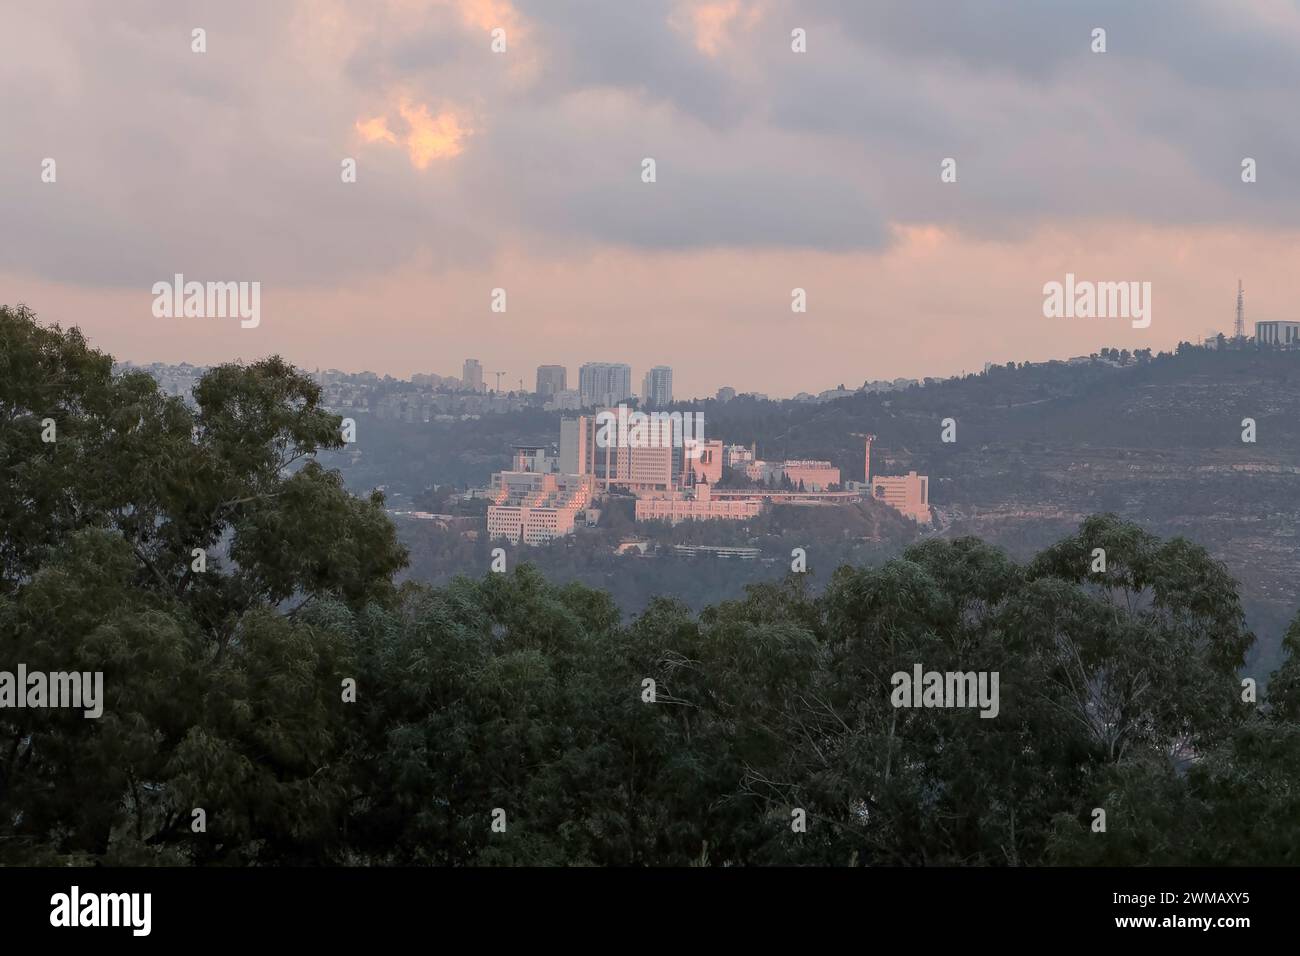 Distant view of Hadassah Medical Center that operates two university hospitals at Ein Kerem West Jerusalem Israel Stock Photo